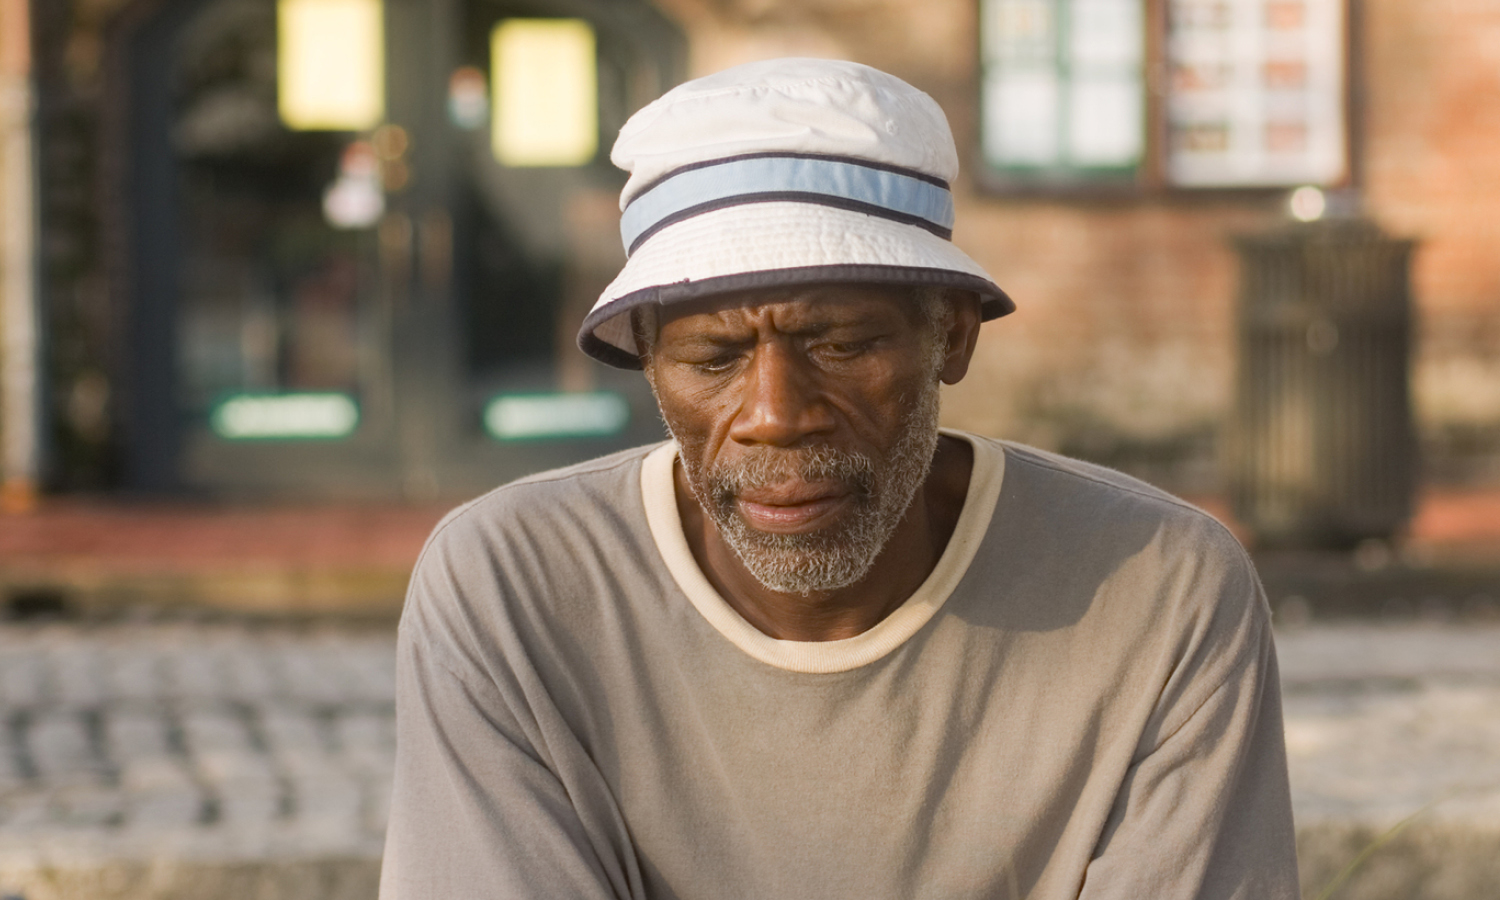 An older man with a hat sits outside, looking downcast. 